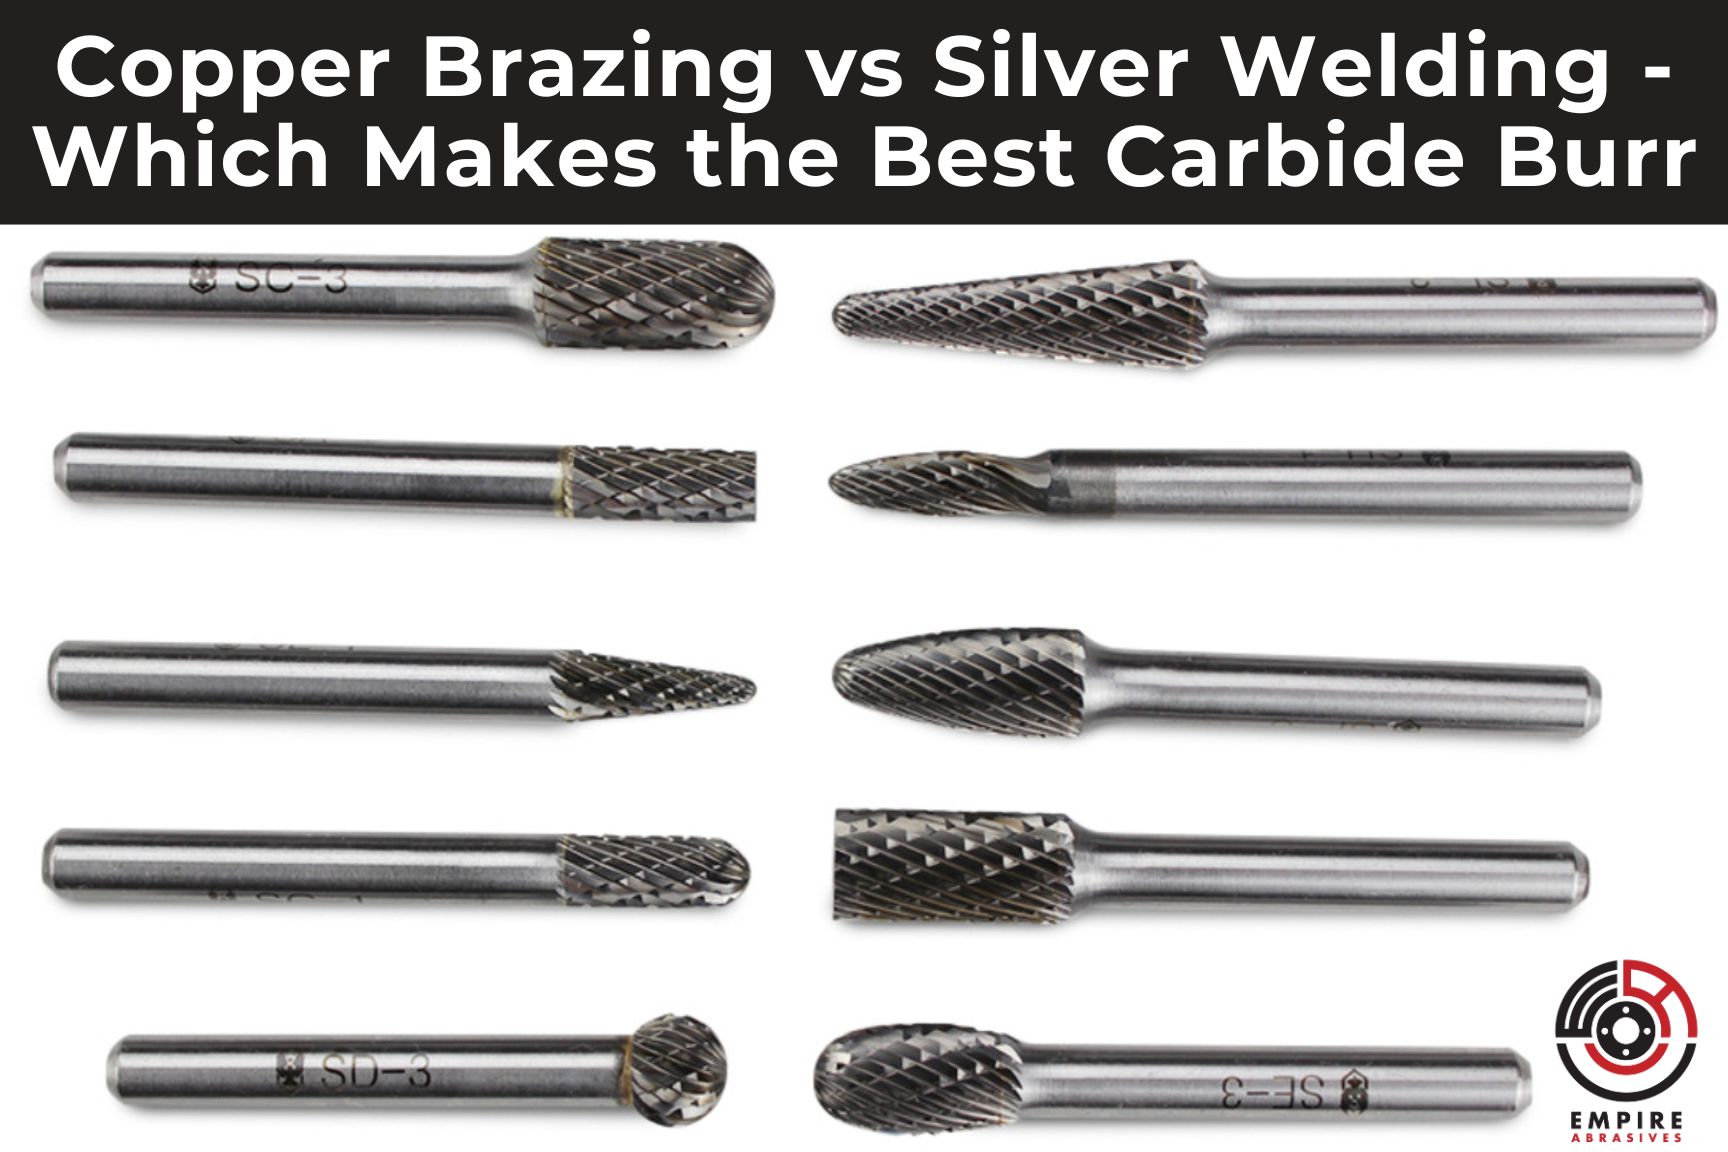 Blog post header for "Copper Brazing vs Silver Welding - Which Makes the Best Carbide Burr". Featuring 10 carbide burrs from a 10 pack of 1/4" double cut tungsten carbide burrs